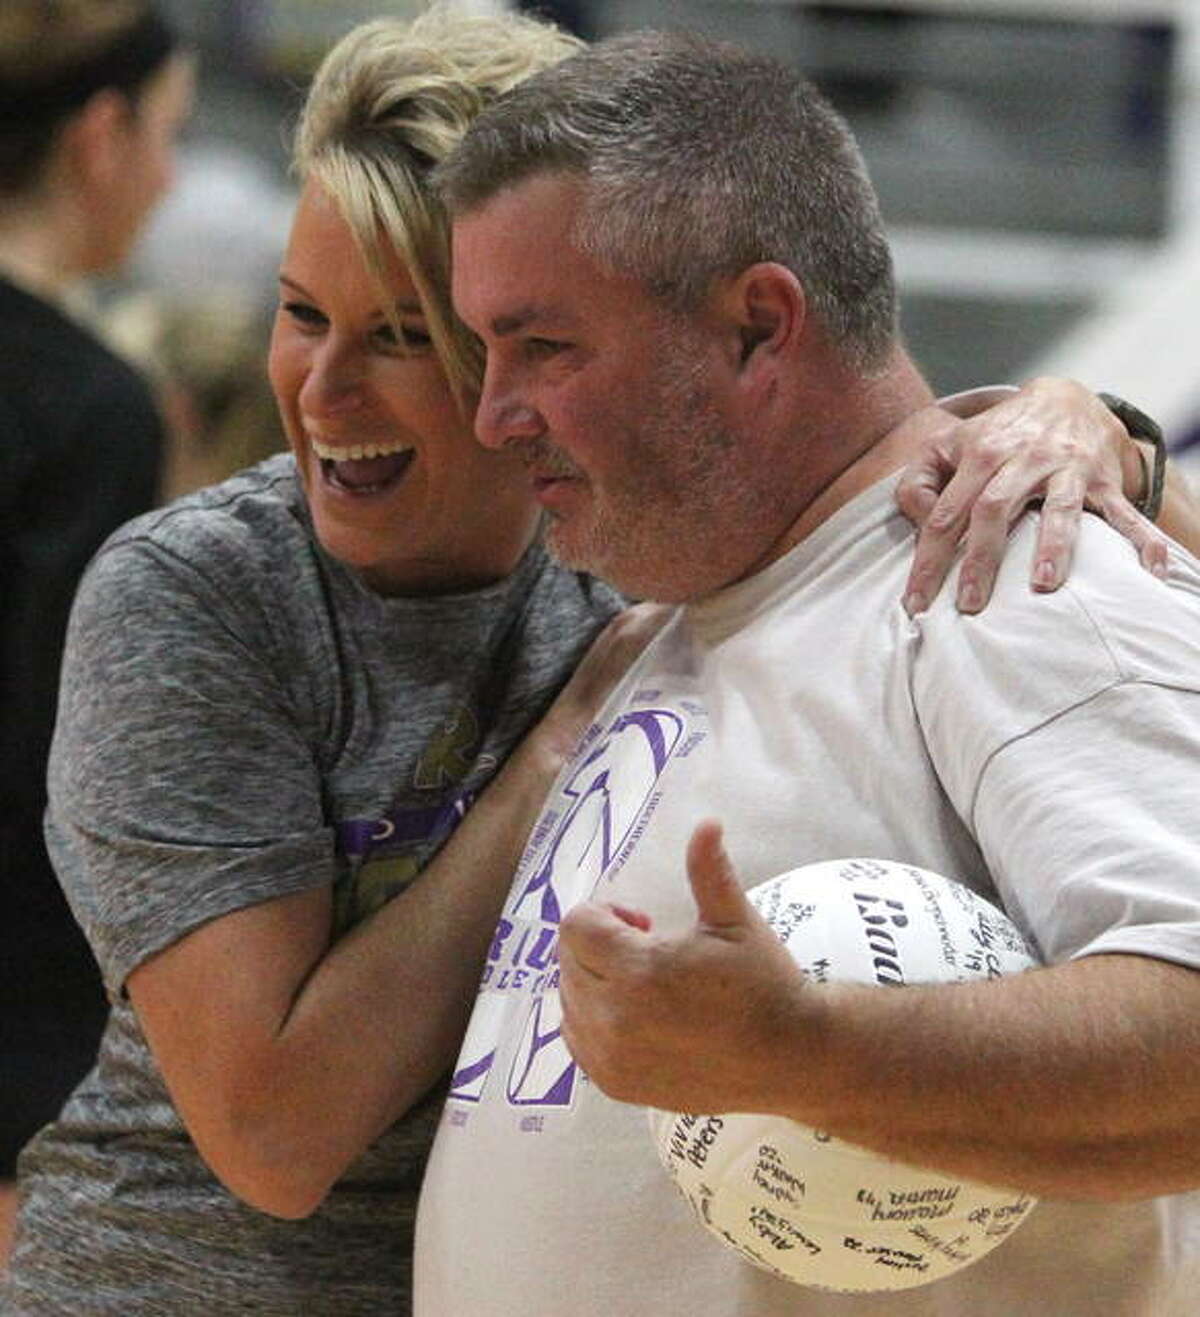 Routt coach Pat Gibson gets a hug from a former player after Thursday night’s match.